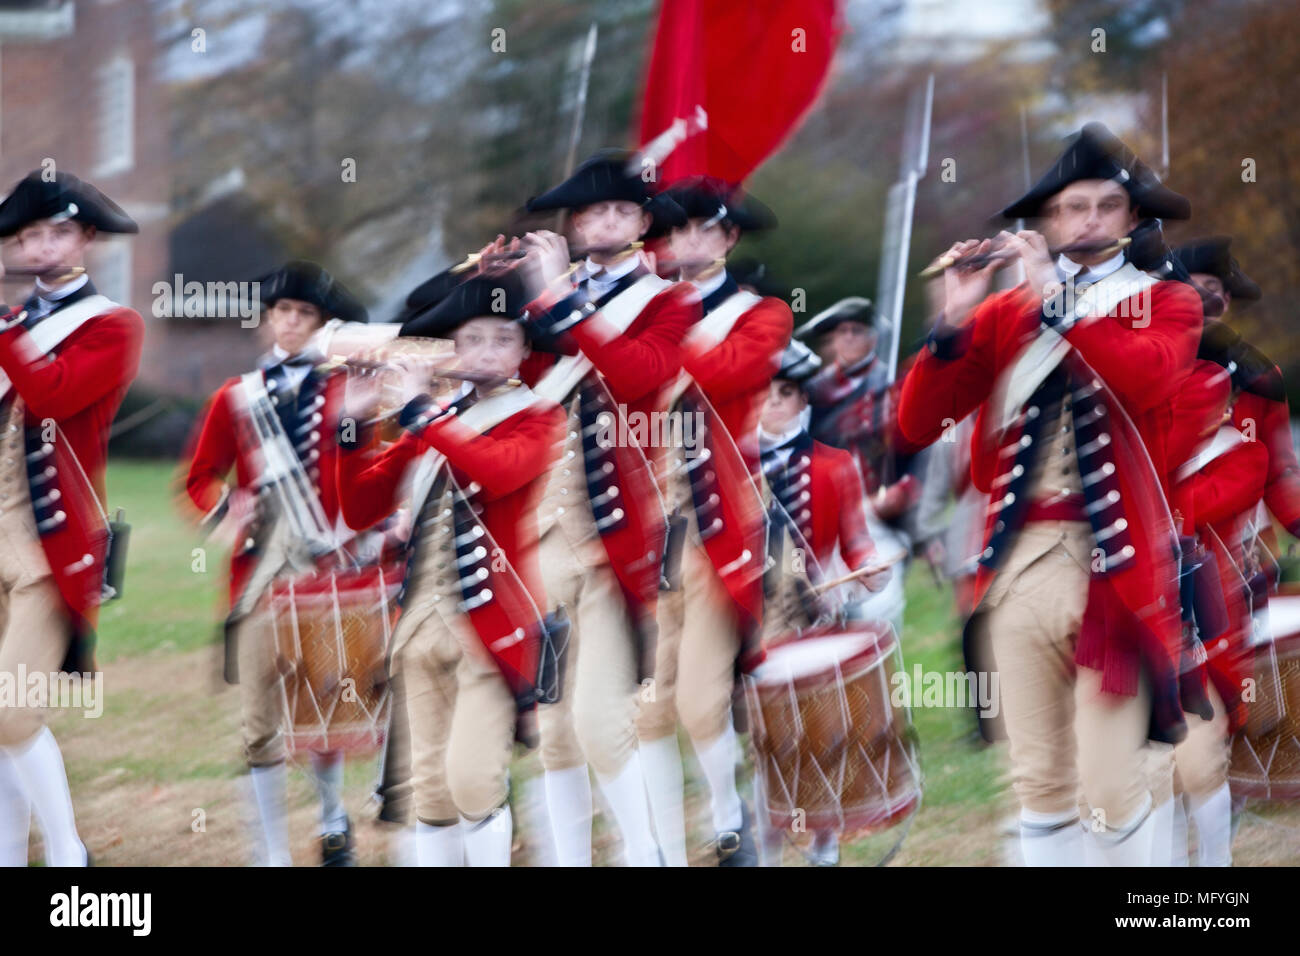 youthful Colonial fife and drum marching band Duke of Gloucester Street colonial Williamsburg Virginia Stock Photo